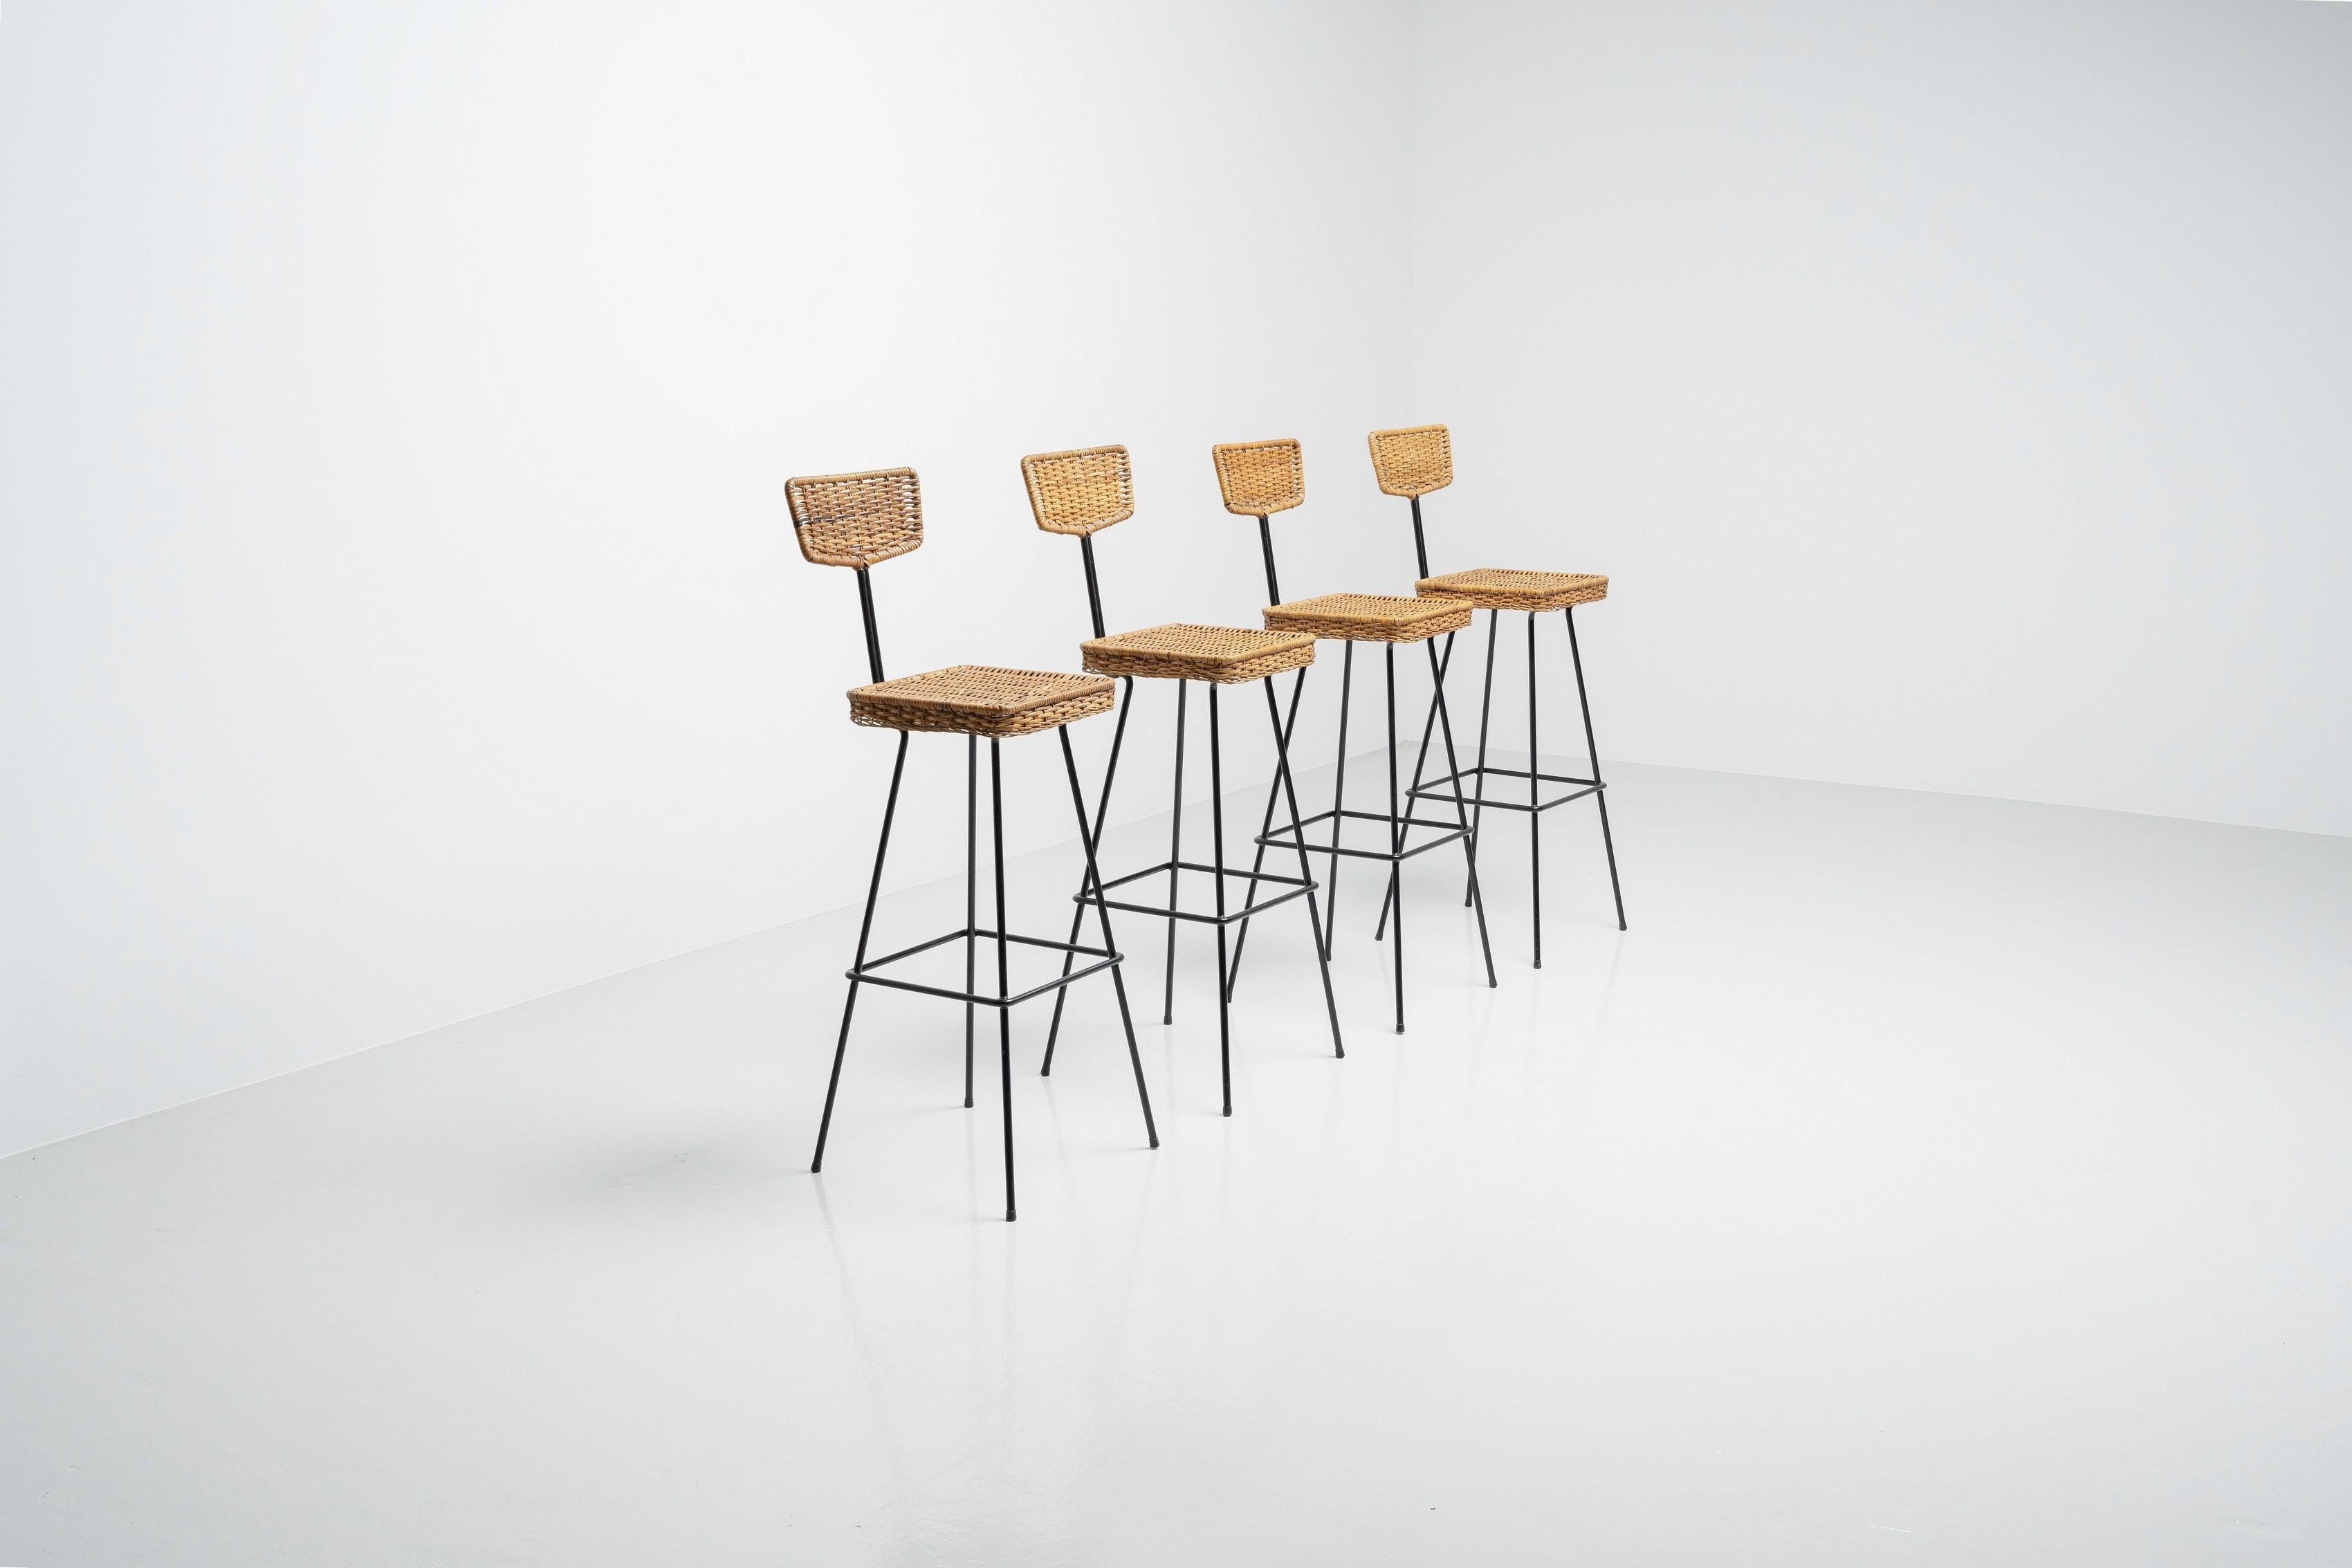 Set of four bar stools designed by Herta Maria Witzemann  and manufactured by Erwin Behr in 1950. The work of Witzemann typically consists out of light and vibrant structures, which have a feeling of lightness to it and woven cane was often used as